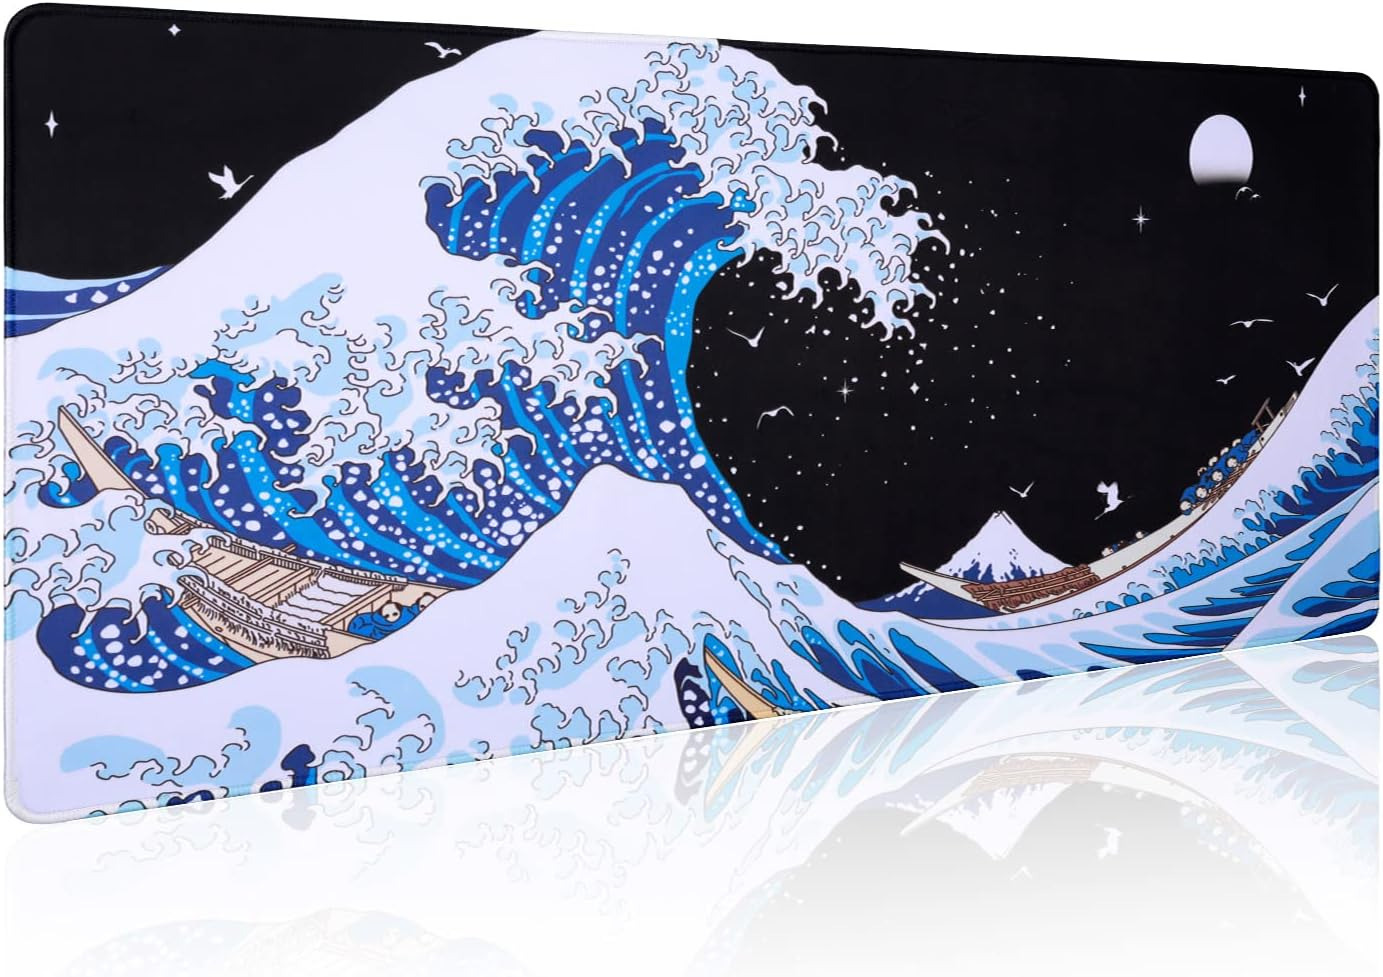 Sea Wave Japanese Art Mouse Pad Gaming XL Large Desk Mat Long Extended Mousepad